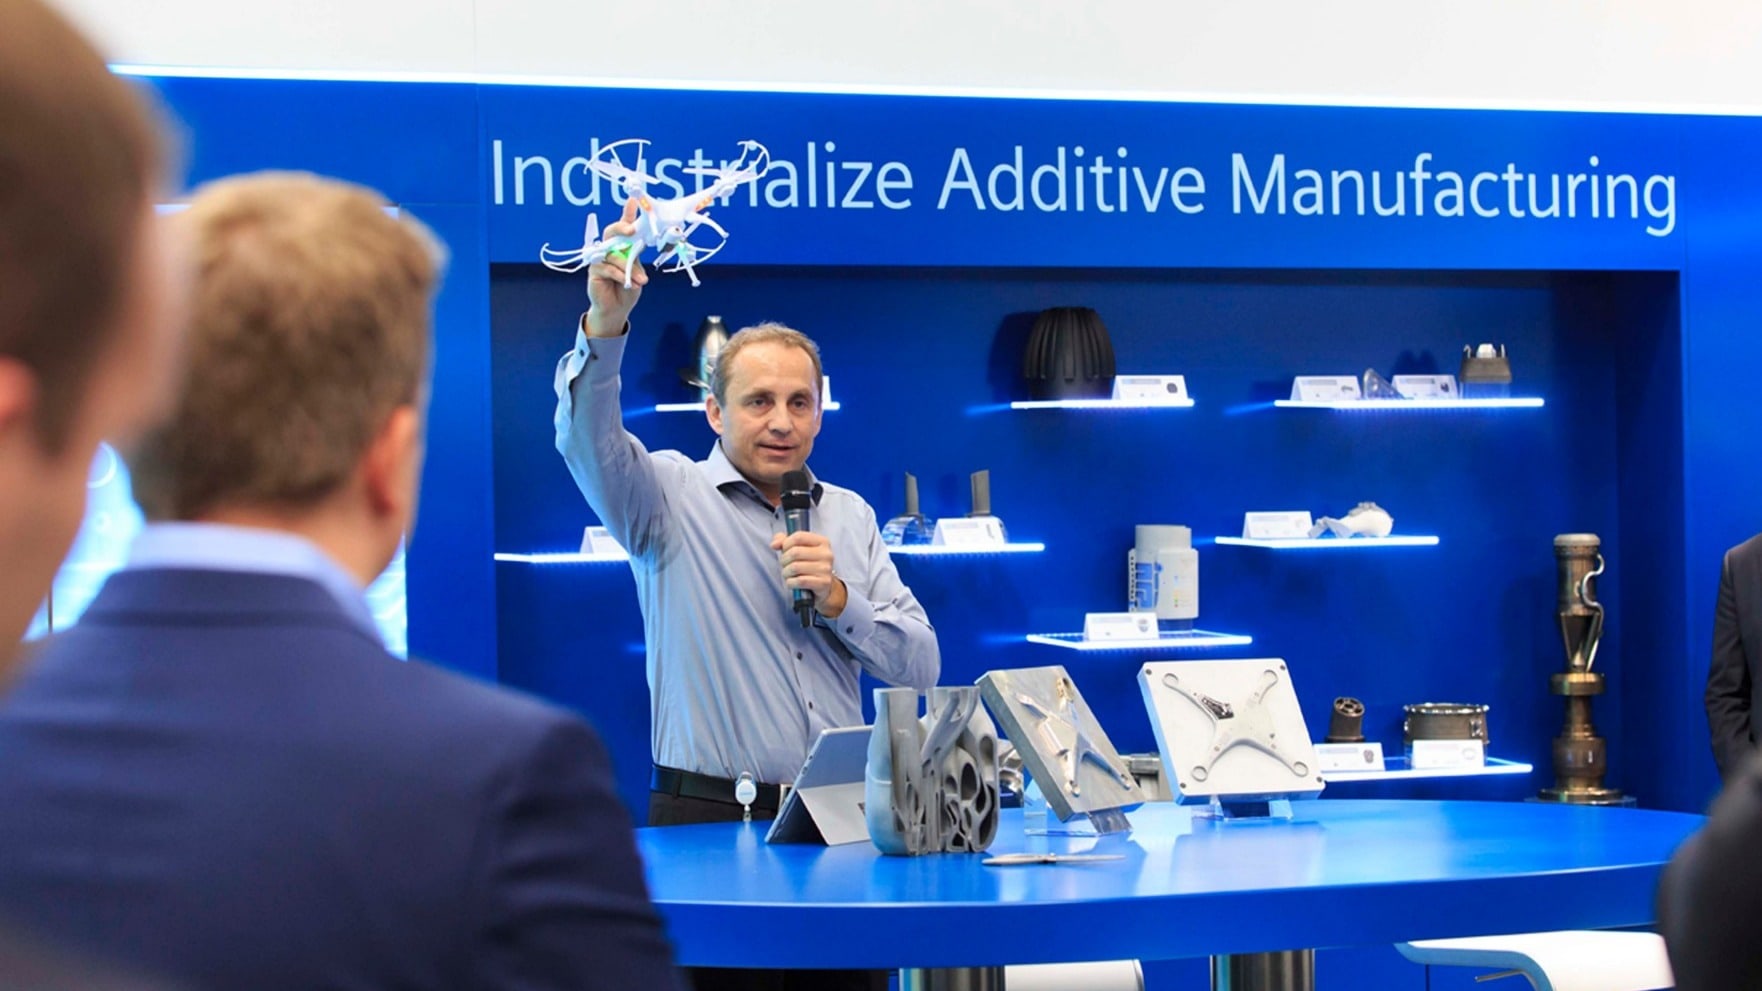 Gain deep insights into our solutions for additive manufacturing.